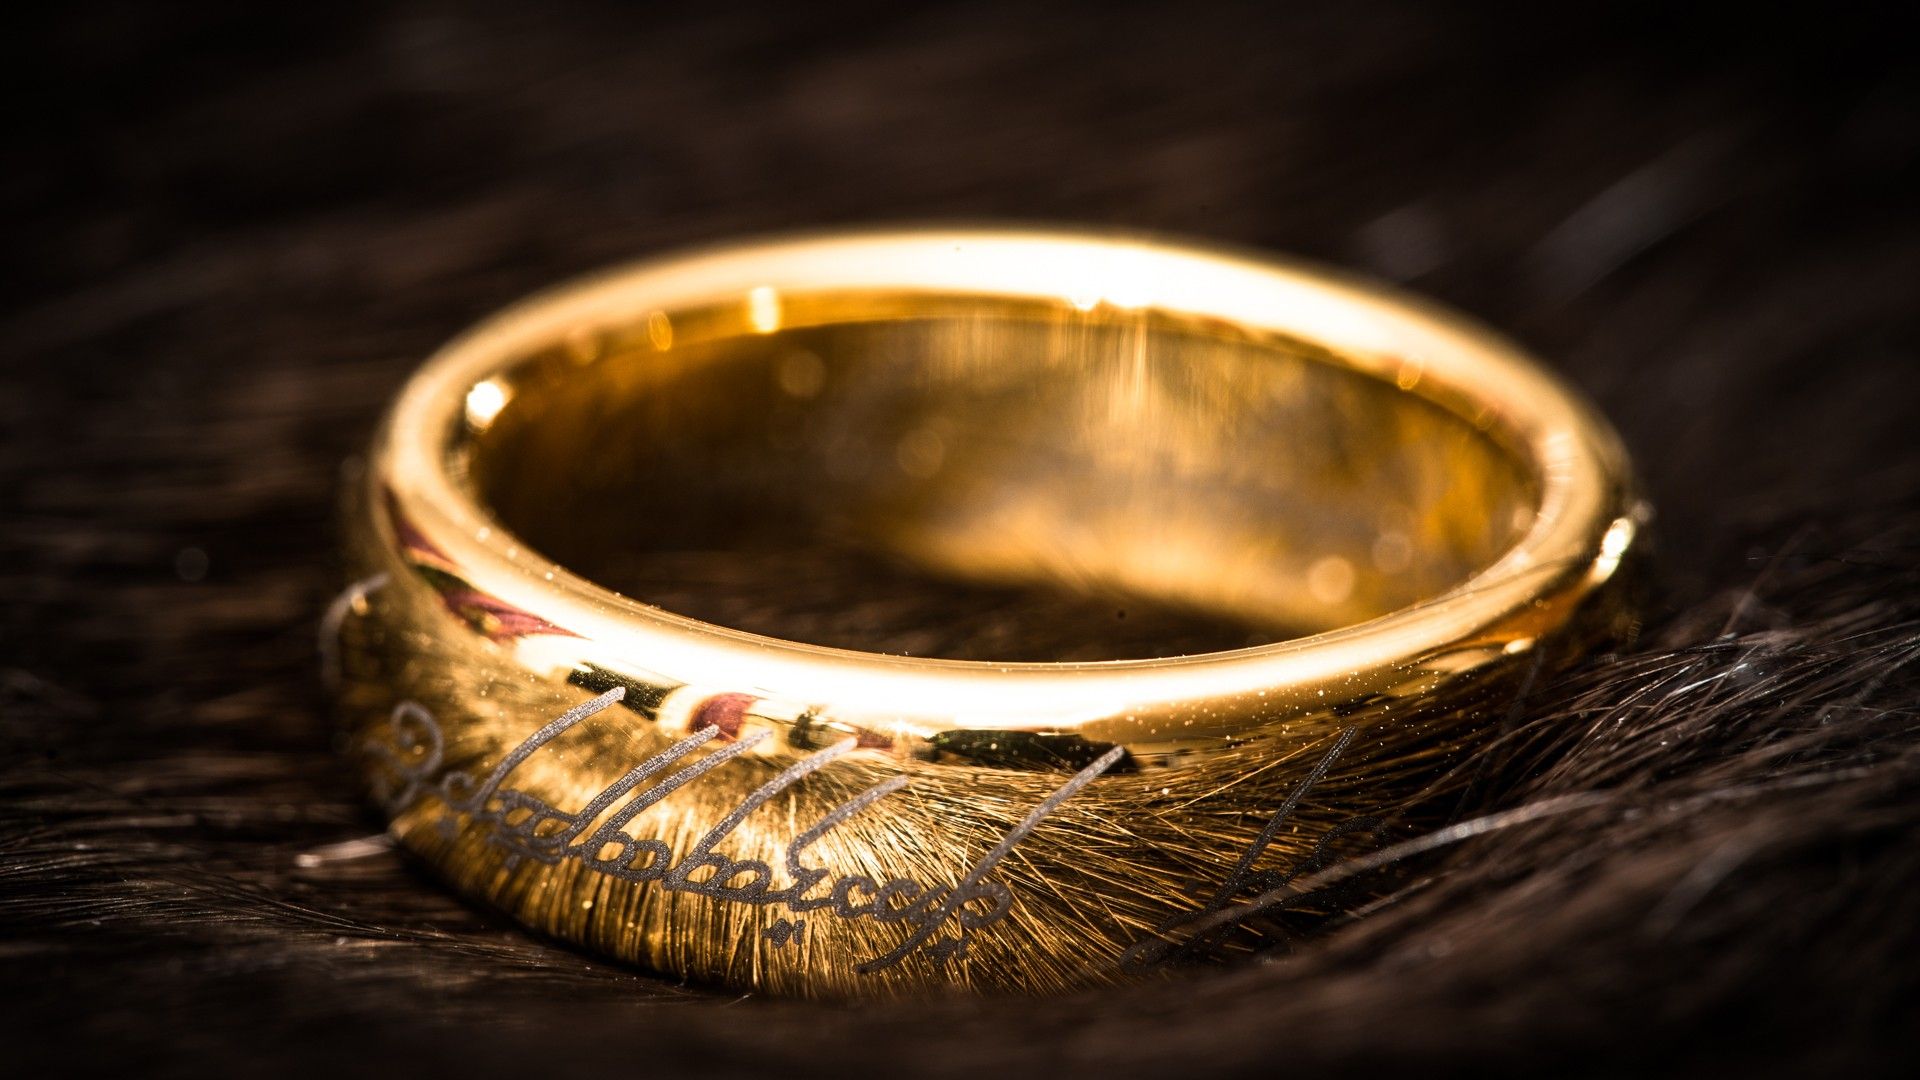 47+] The One Ring Wallpapers